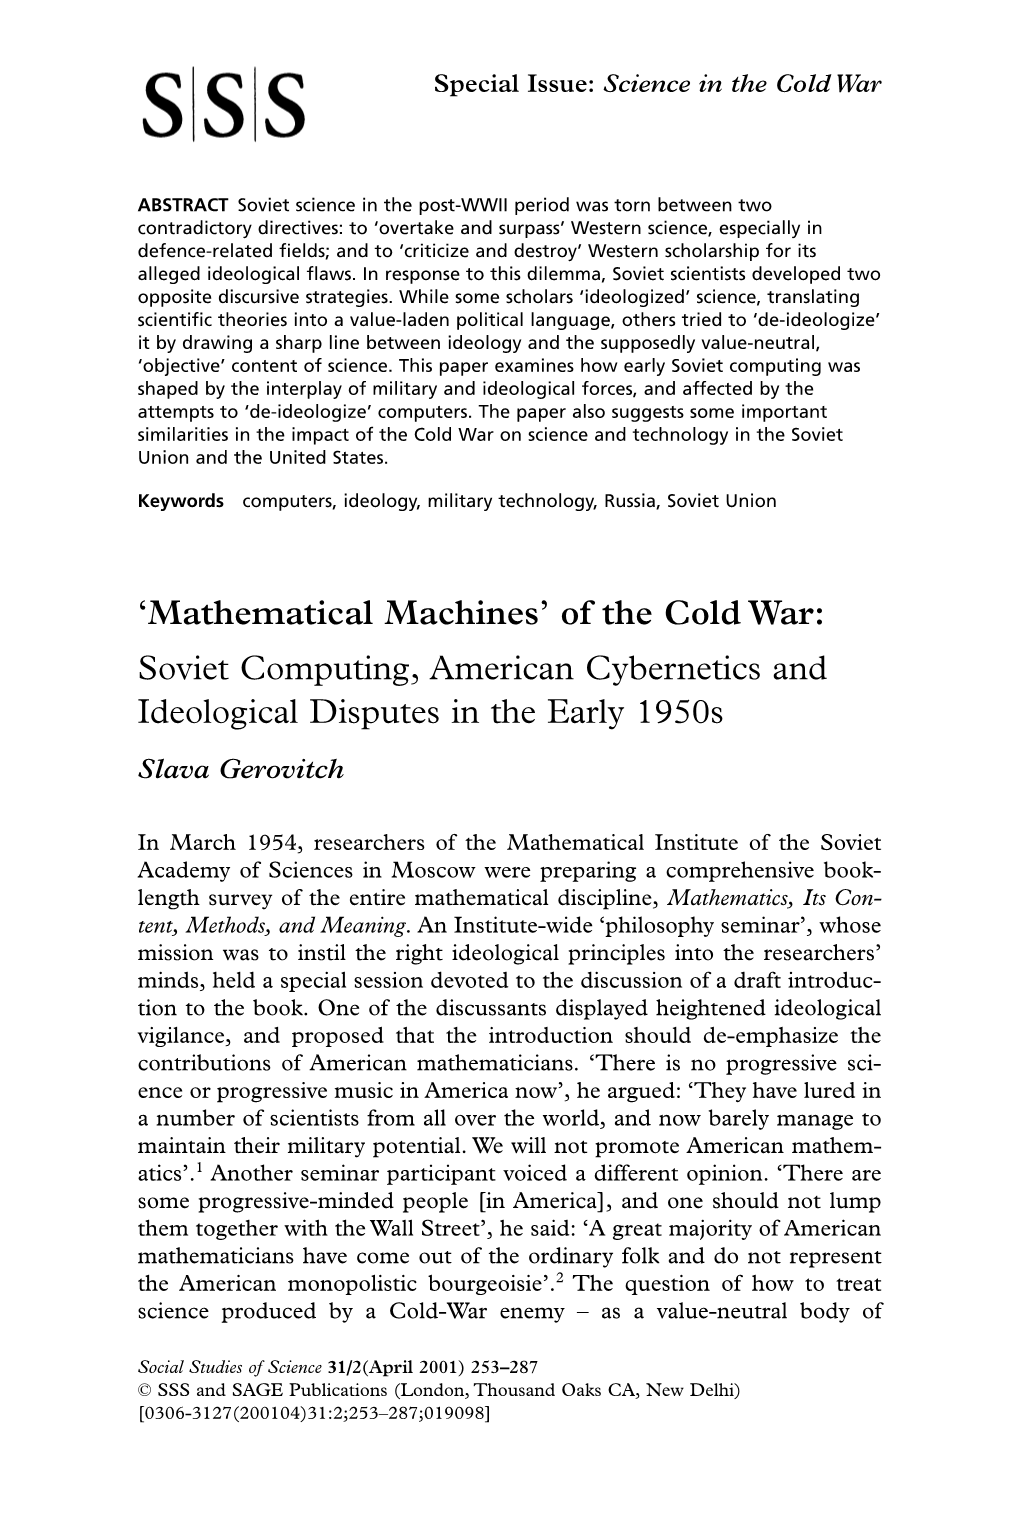 'Mathematical Machines' of the Cold War: Soviet Computing, American